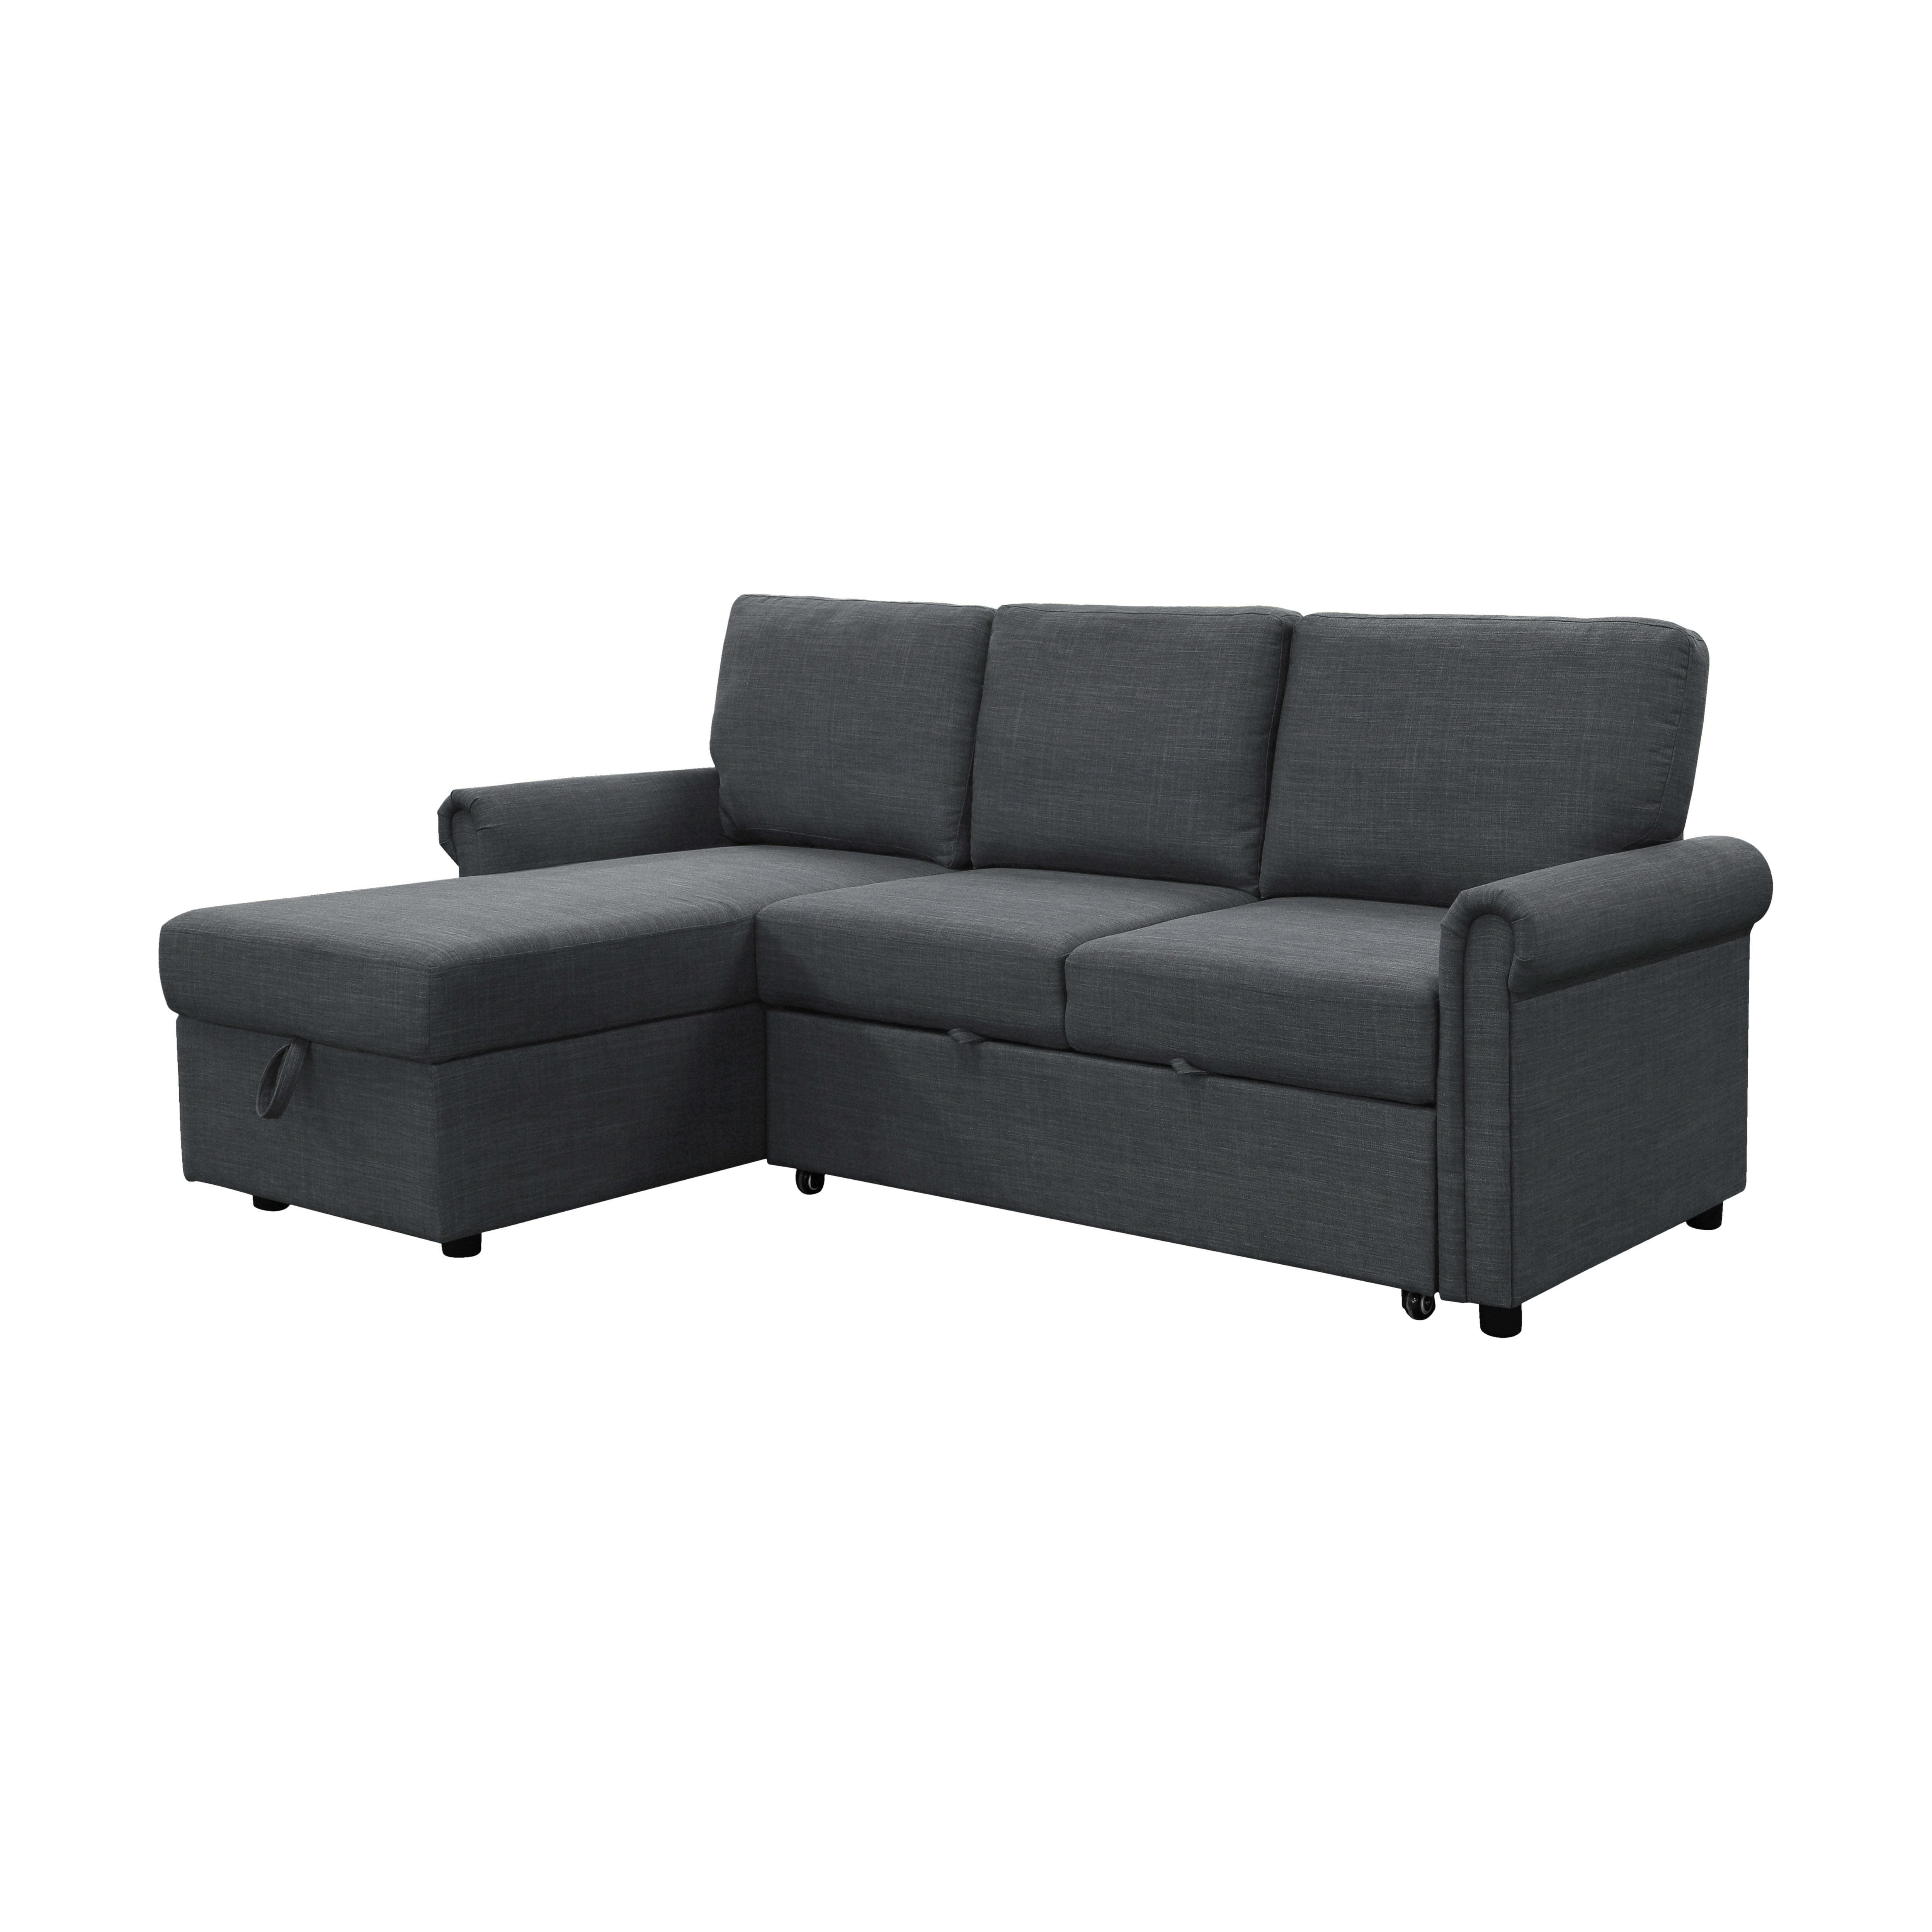 Abbyson Kent Reversible Storage Sofa Bed Sectional, Charcoal Gray ...